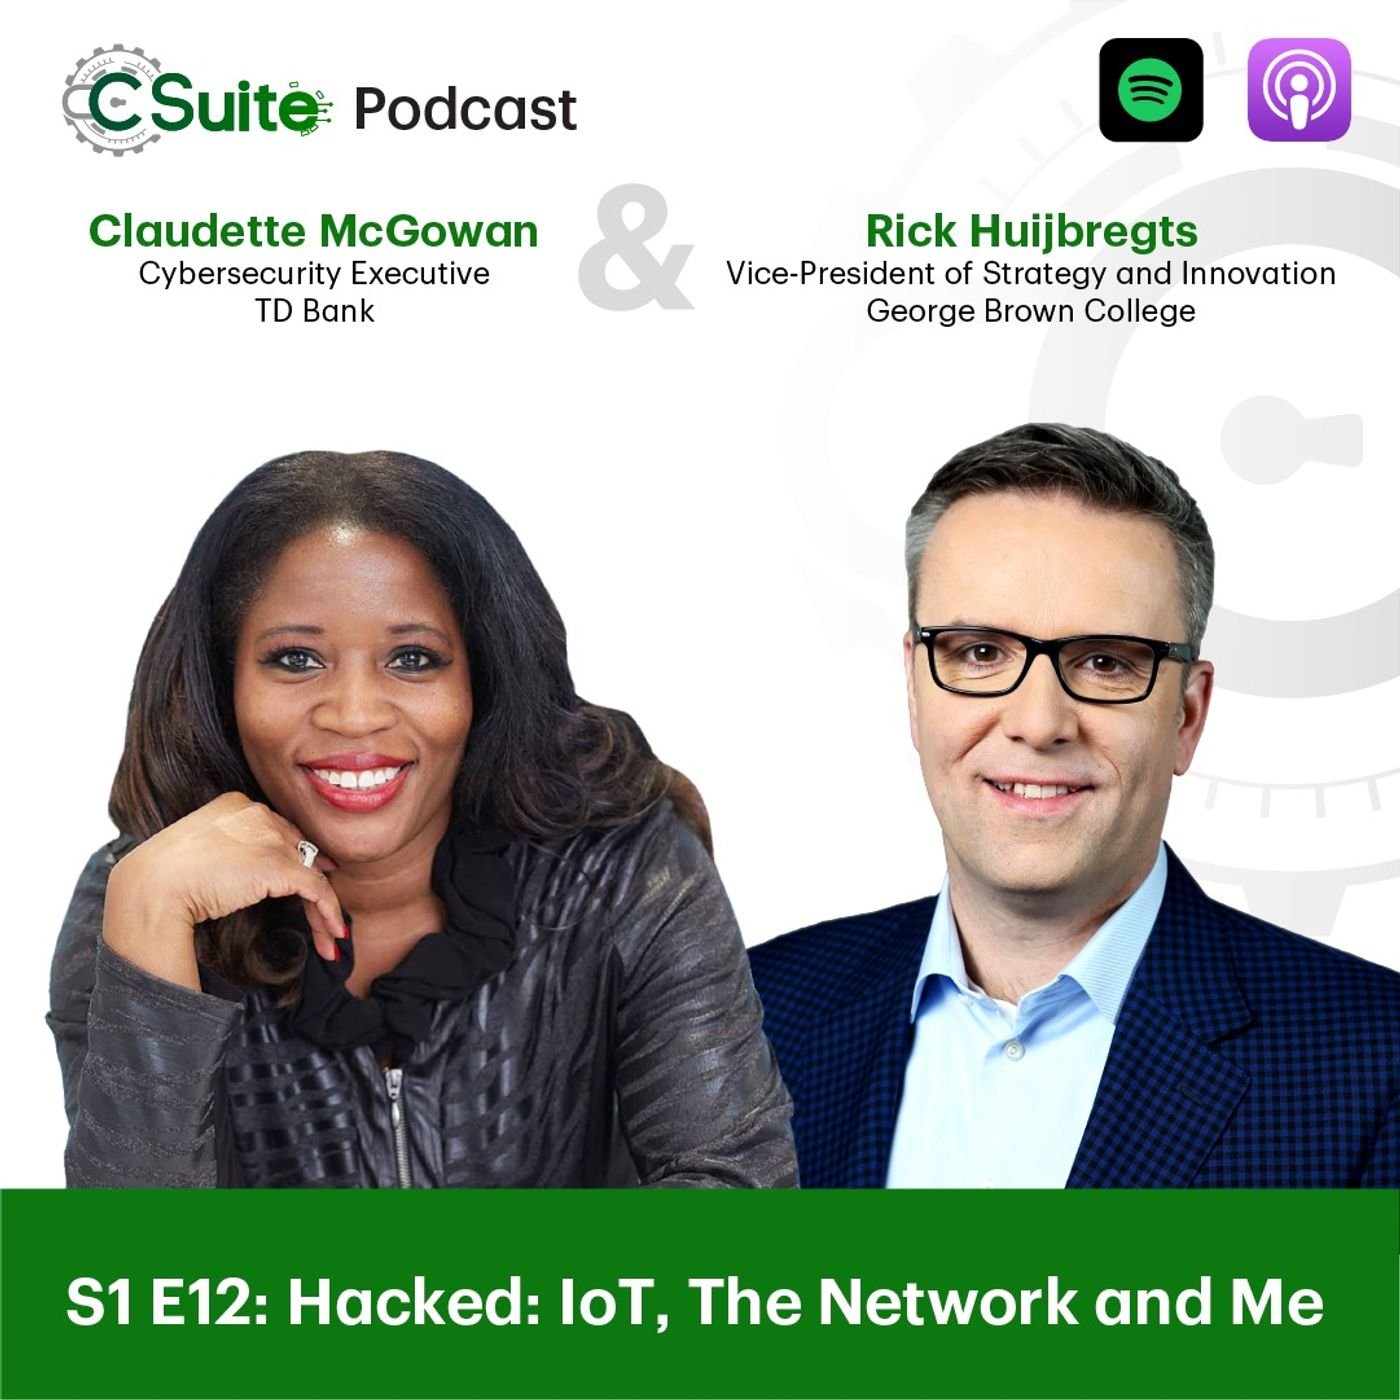 Hacked: IoT, The Network and Me